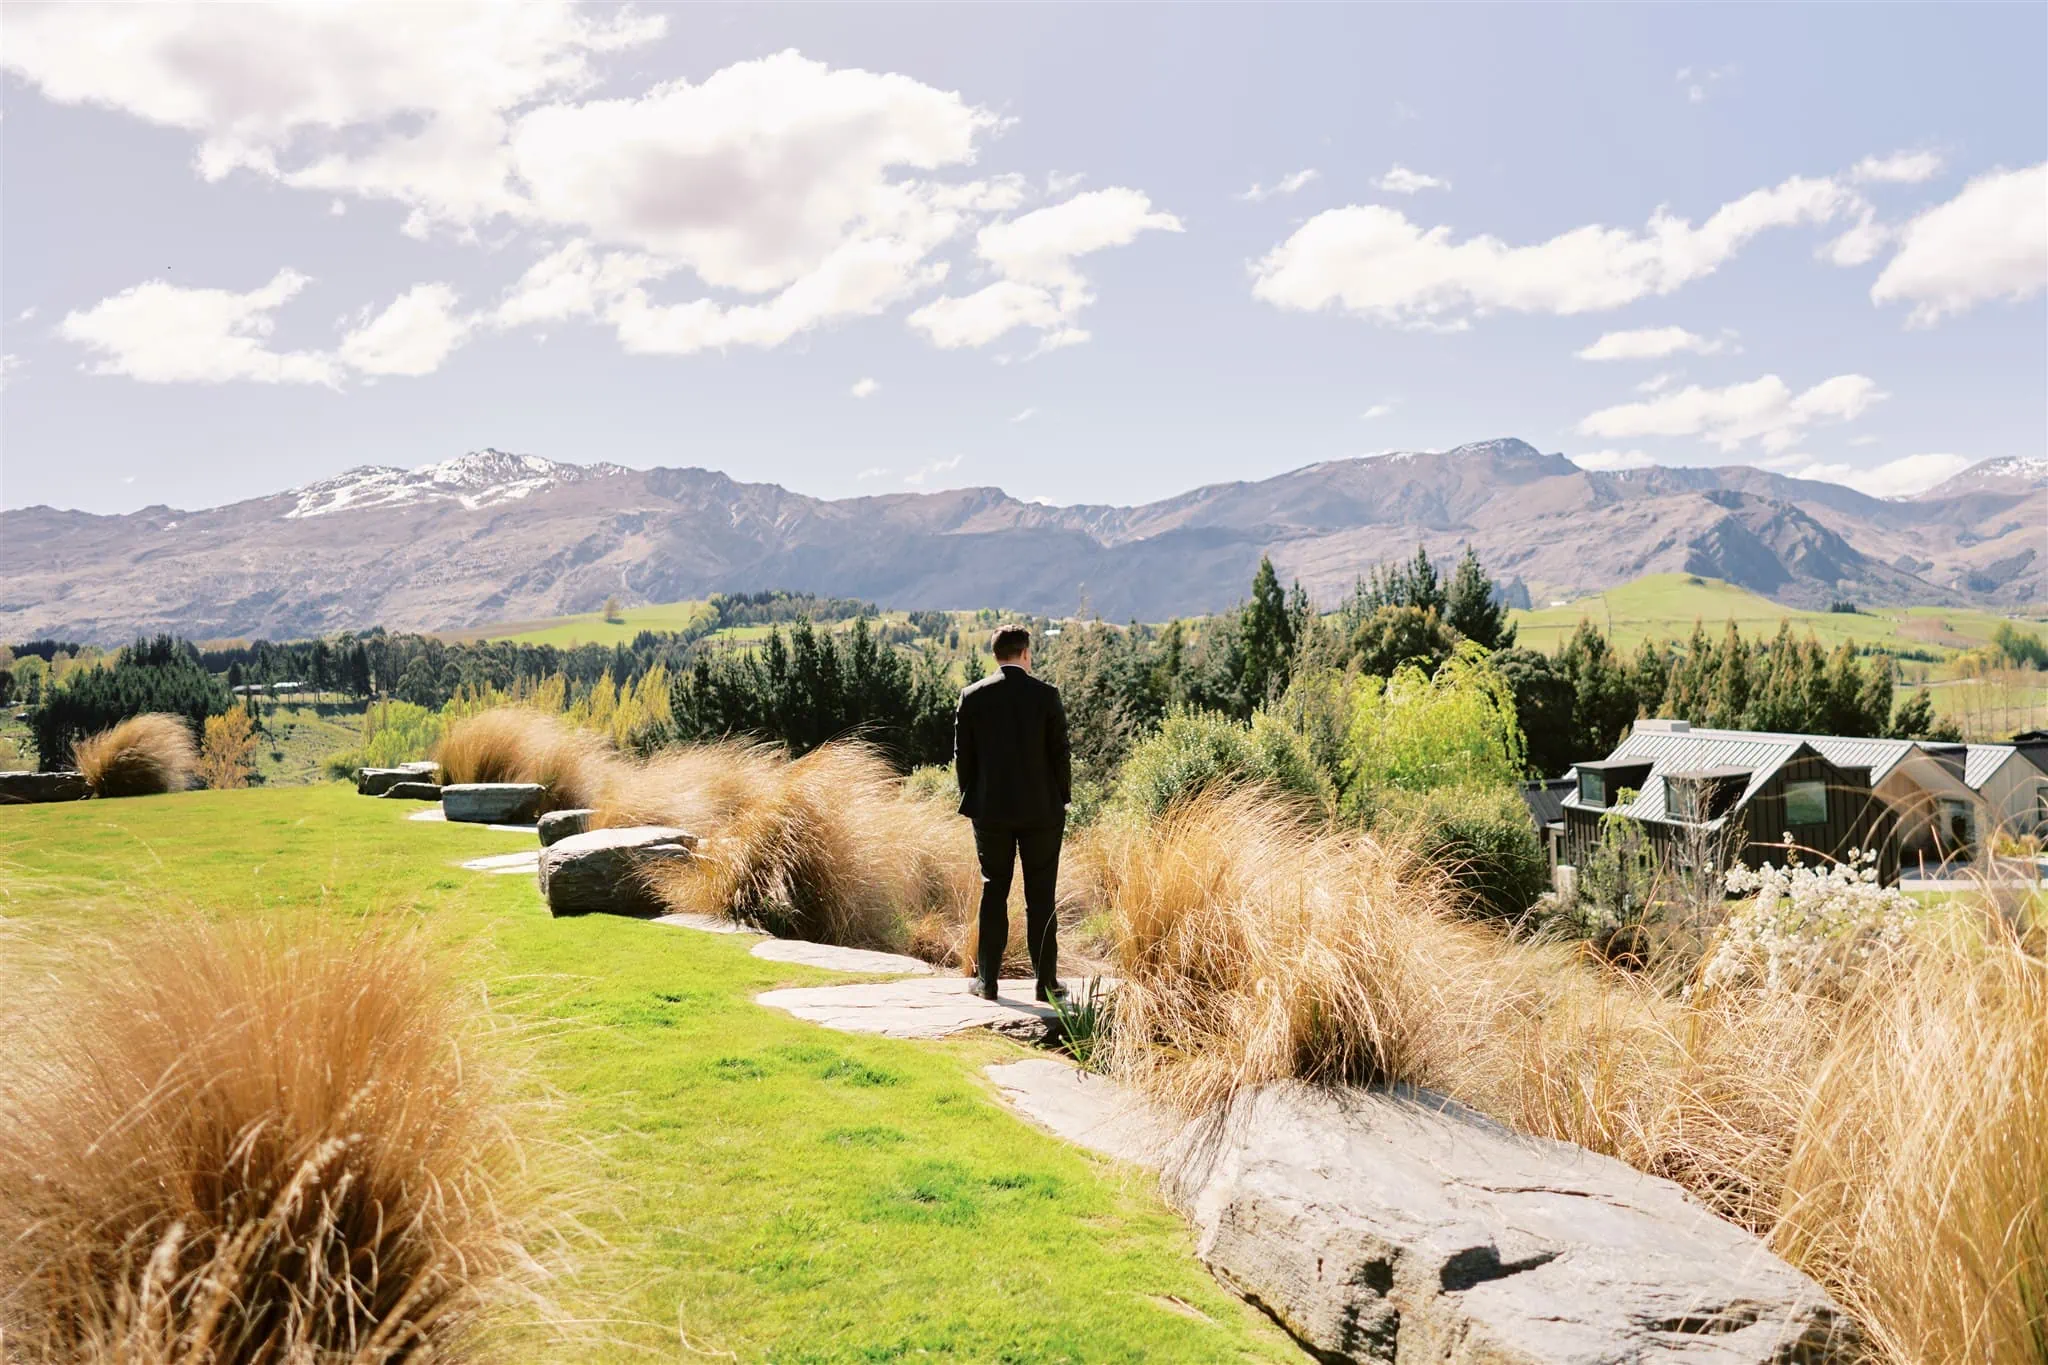 Queenstown Elopement Heli Wedding Photographer クイーンズタウン結婚式 | Alex & Michael's elopement wedding at Roy's Peak, with mountains in the background as the man stands in a grassy area.